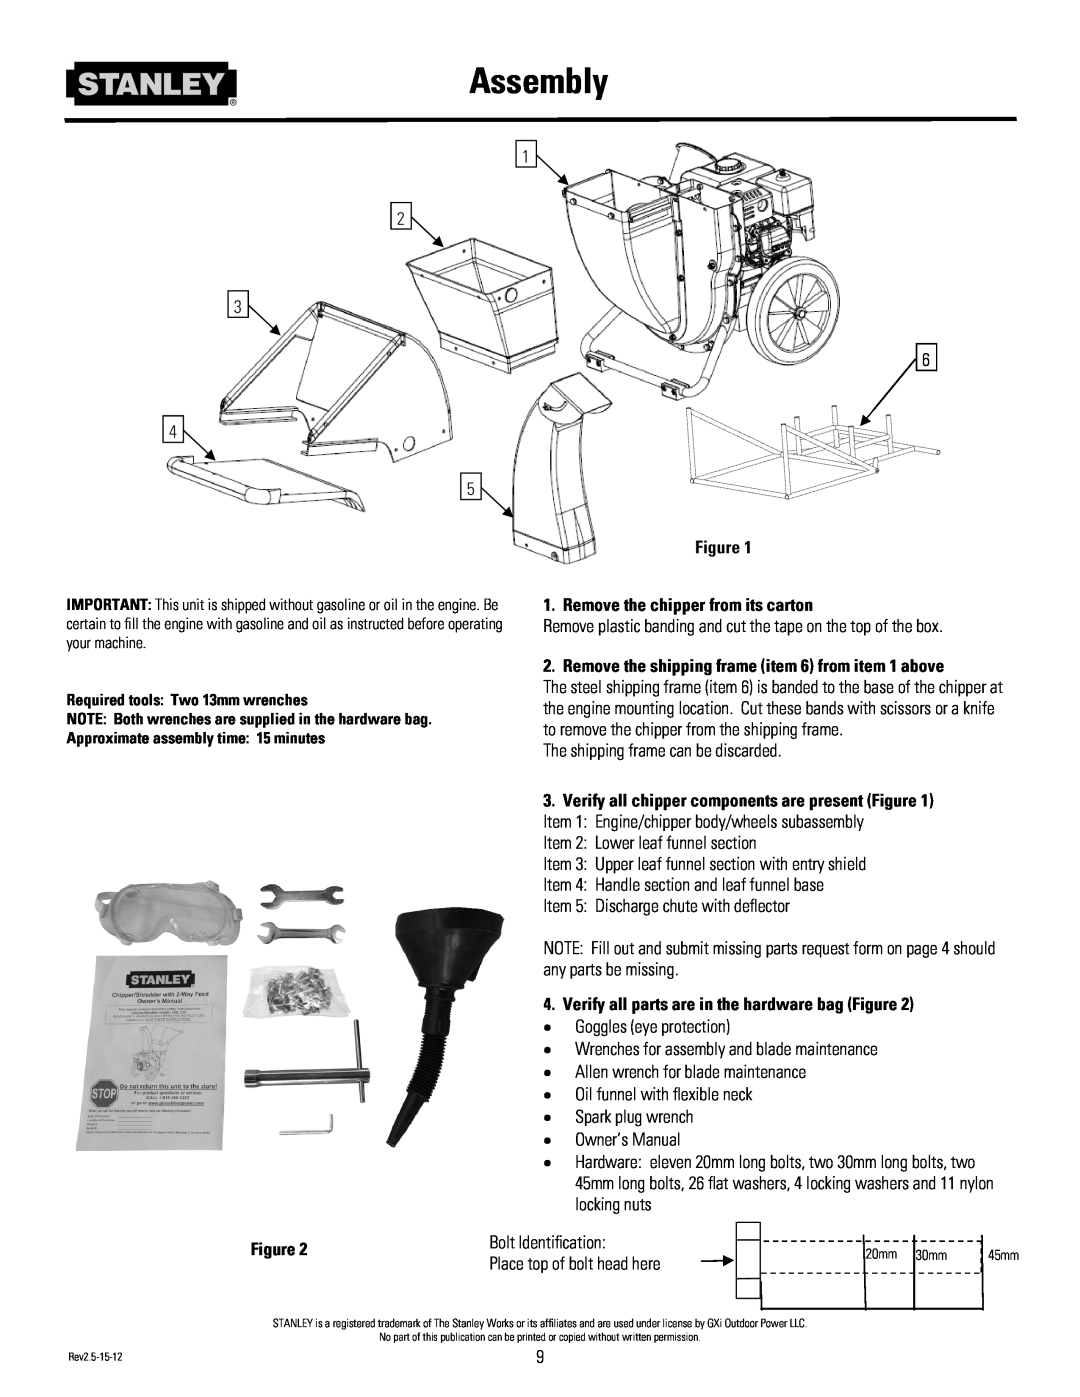 Stanley Black & Decker CH2 owner manual Assembly, Figure, Remove the chipper from its carton 